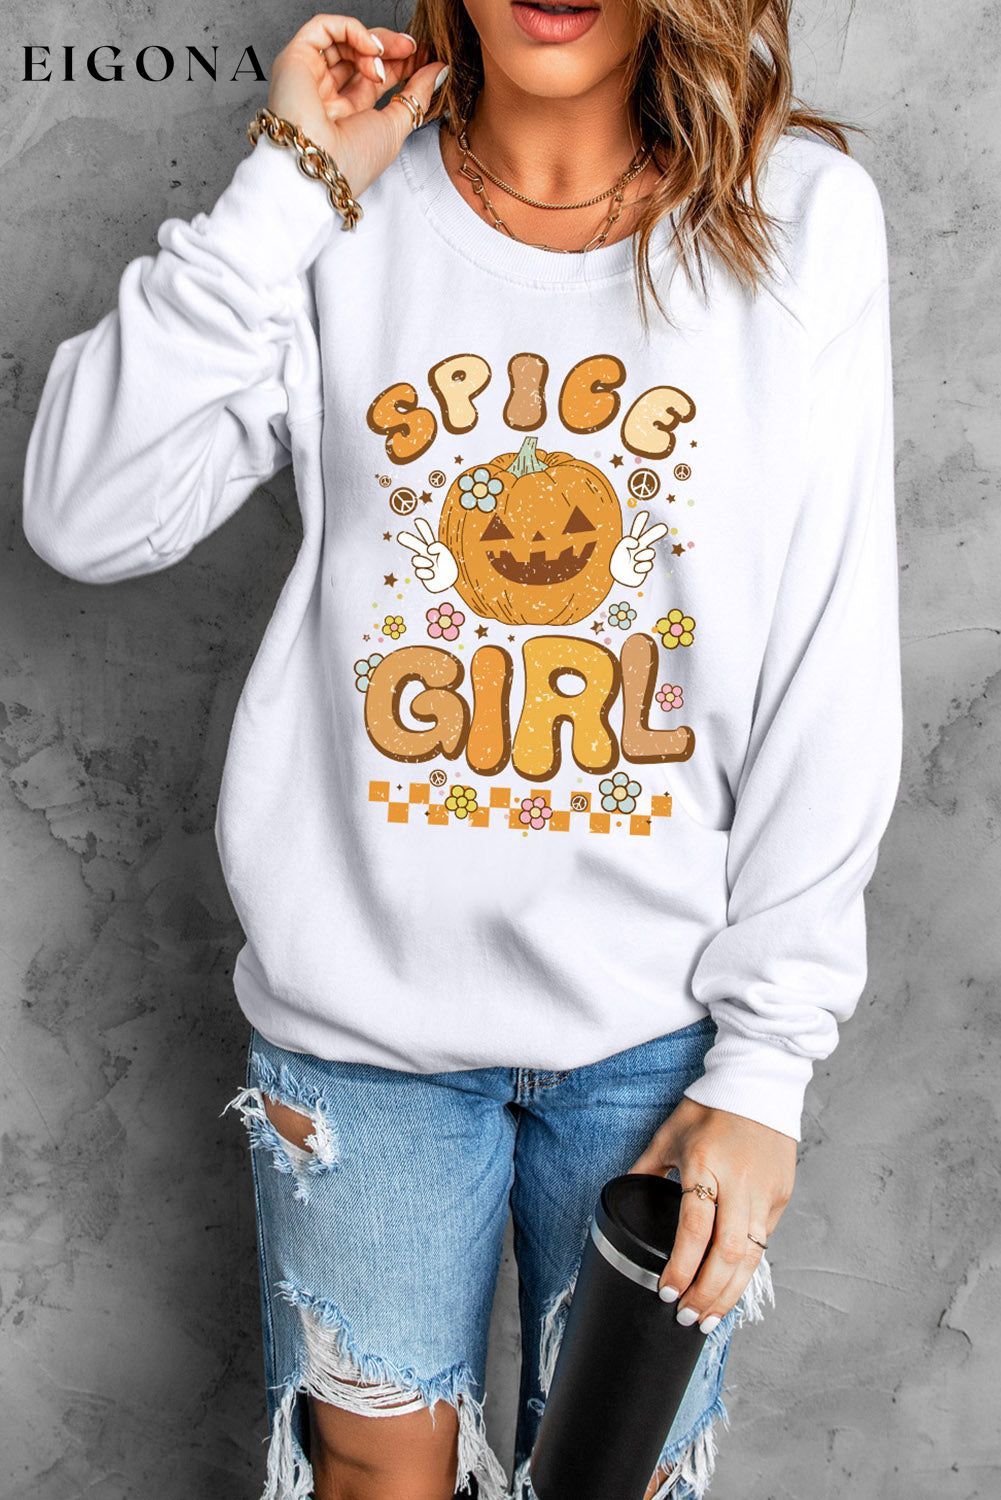 Round Neck Long Sleeve SPICE GIRL Graphic Sweatshirt clothes long sleeve top Ship From Overseas Sweater sweaters Sweatshirt SYNZ trend